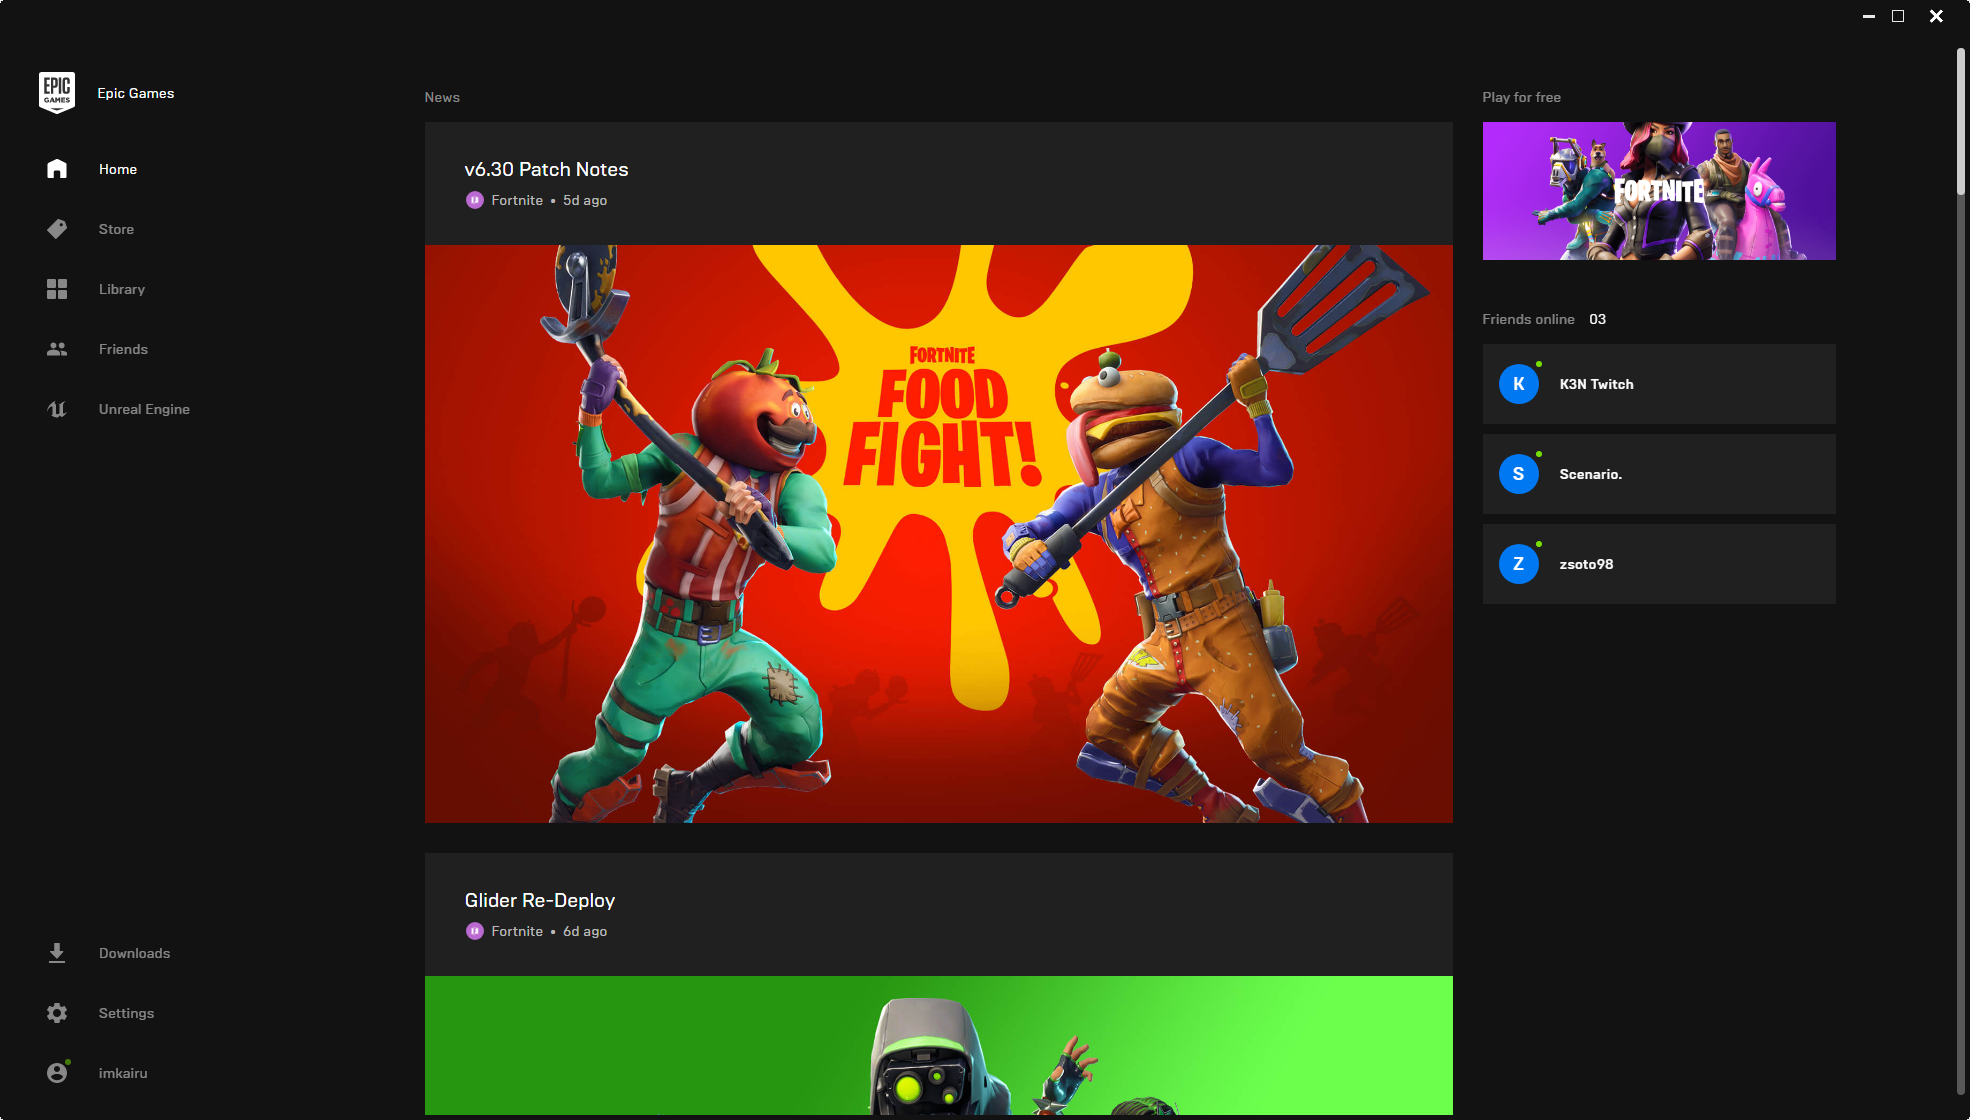 New Epic Games launcher releases in Beta